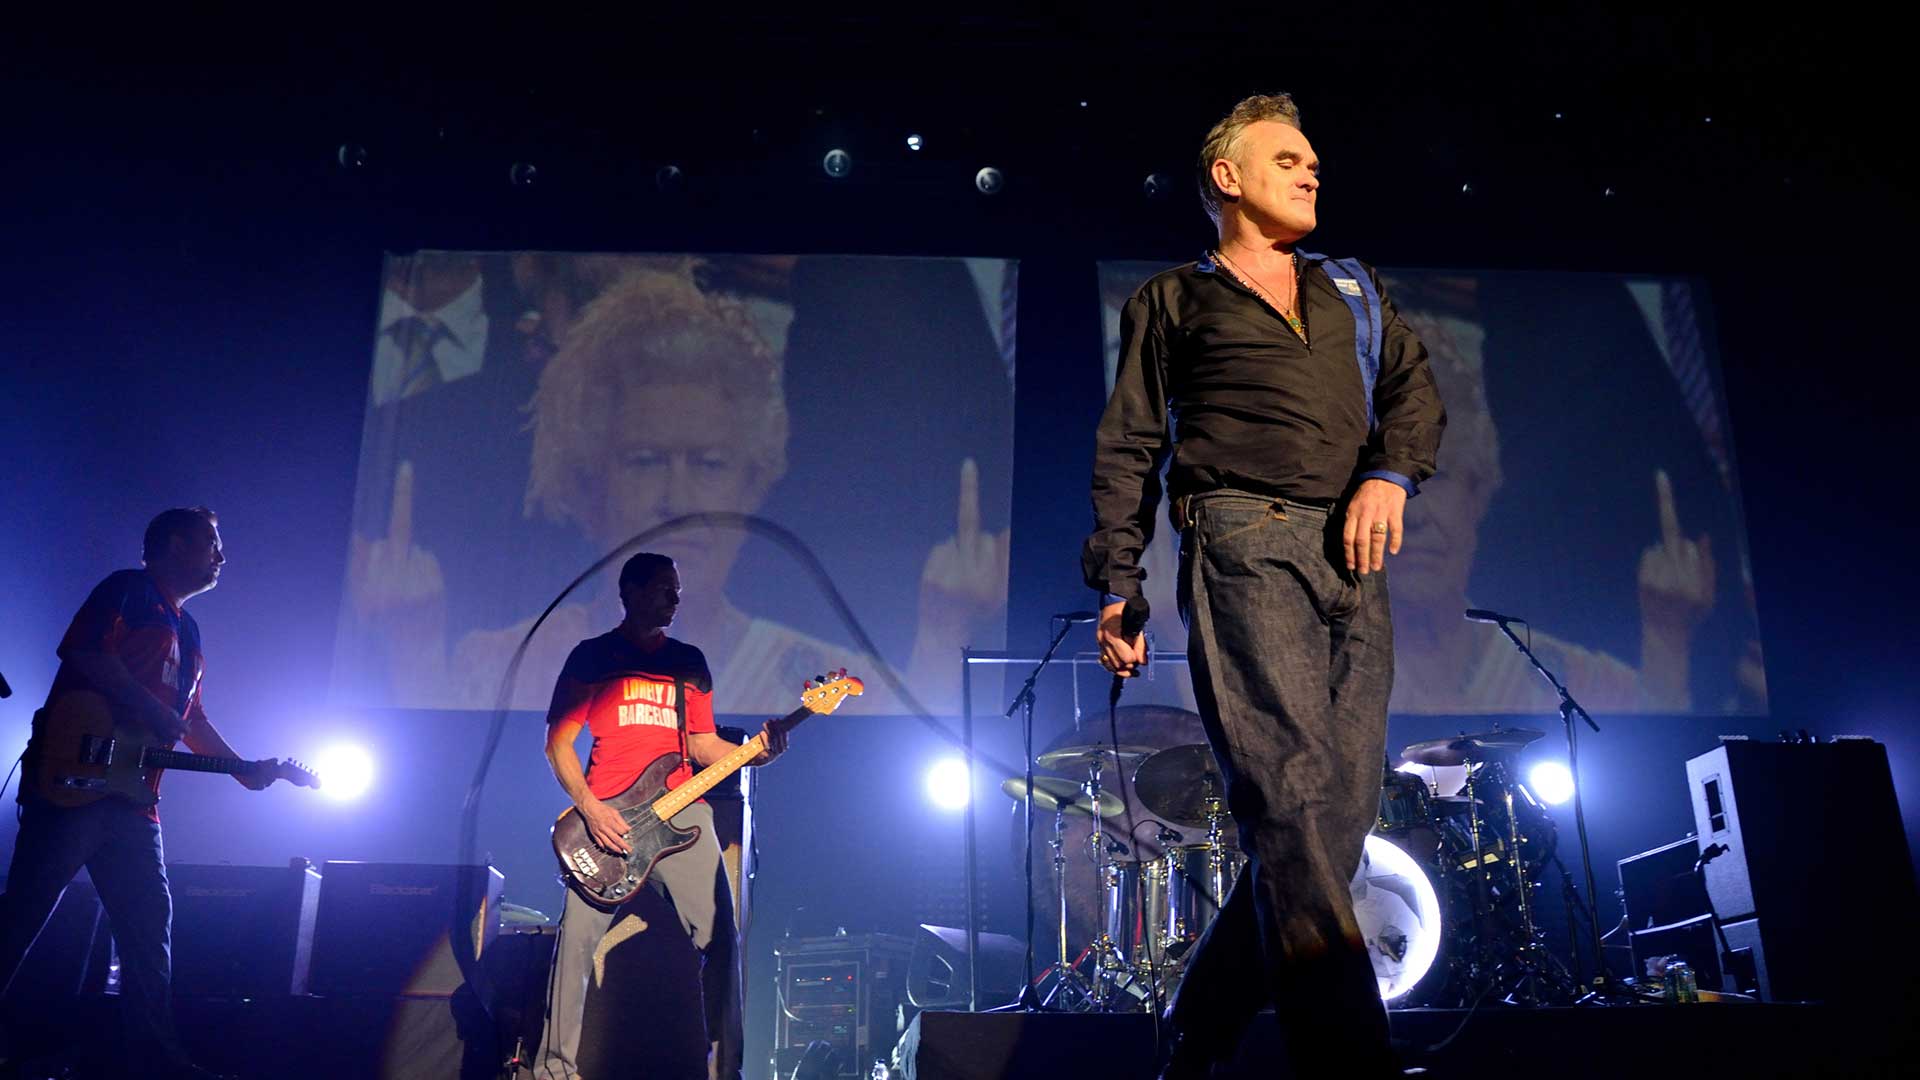 Morrisey dressed in black on stage with two backing guitarists against a blue/black background with screens showing the Queen